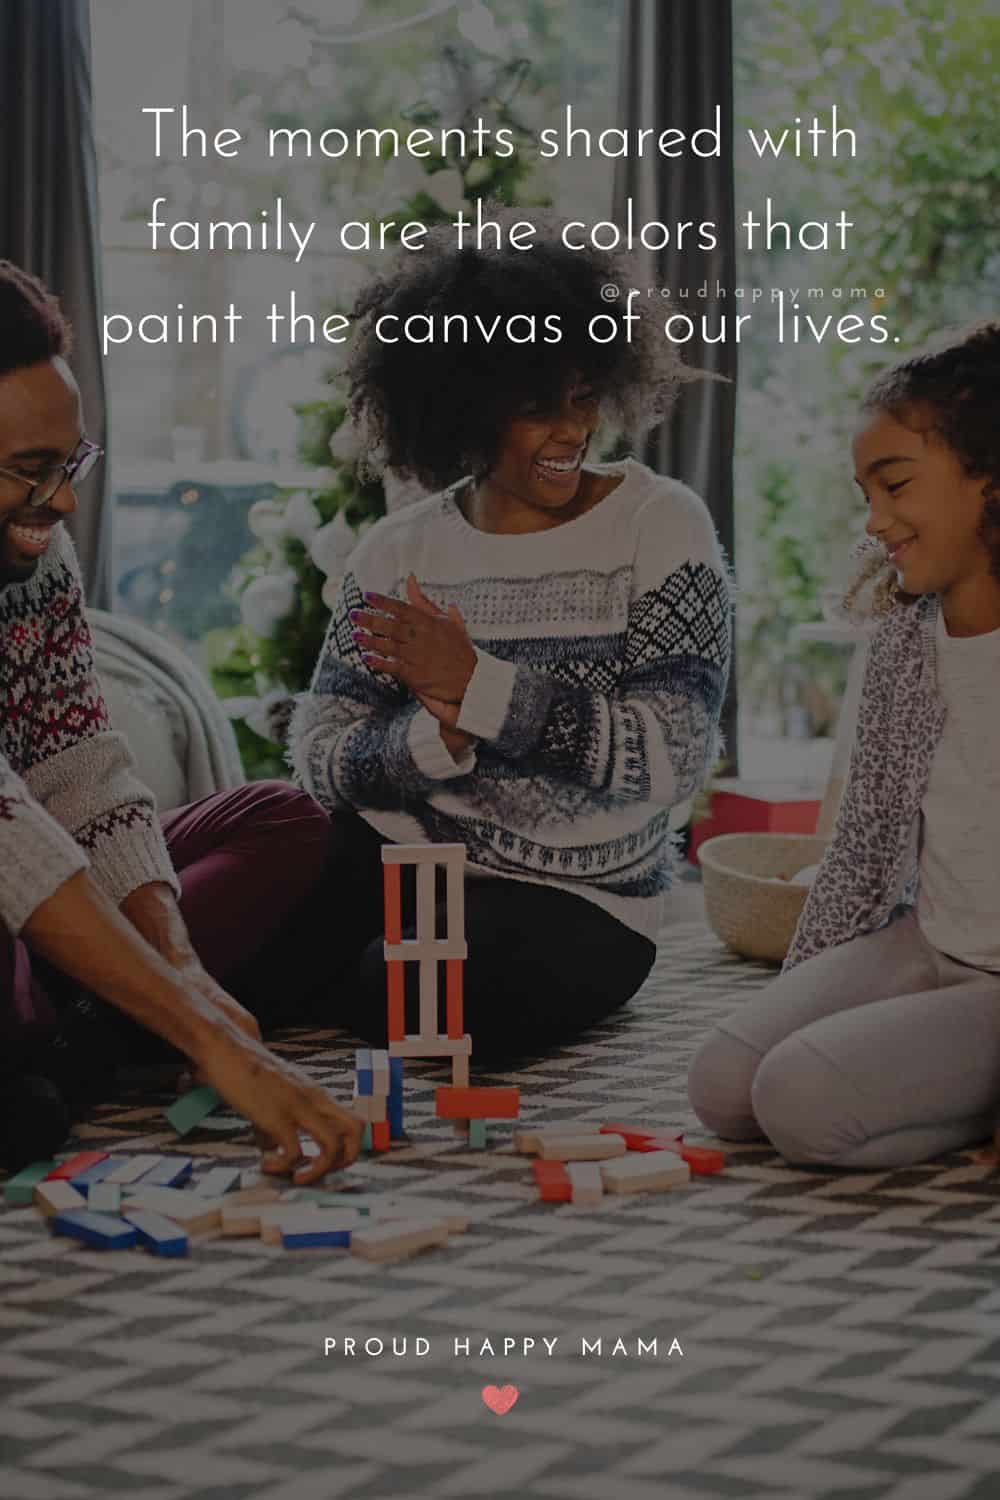 time with family quotes - The moments shared with family are the colors that paint the canvas of our lives.